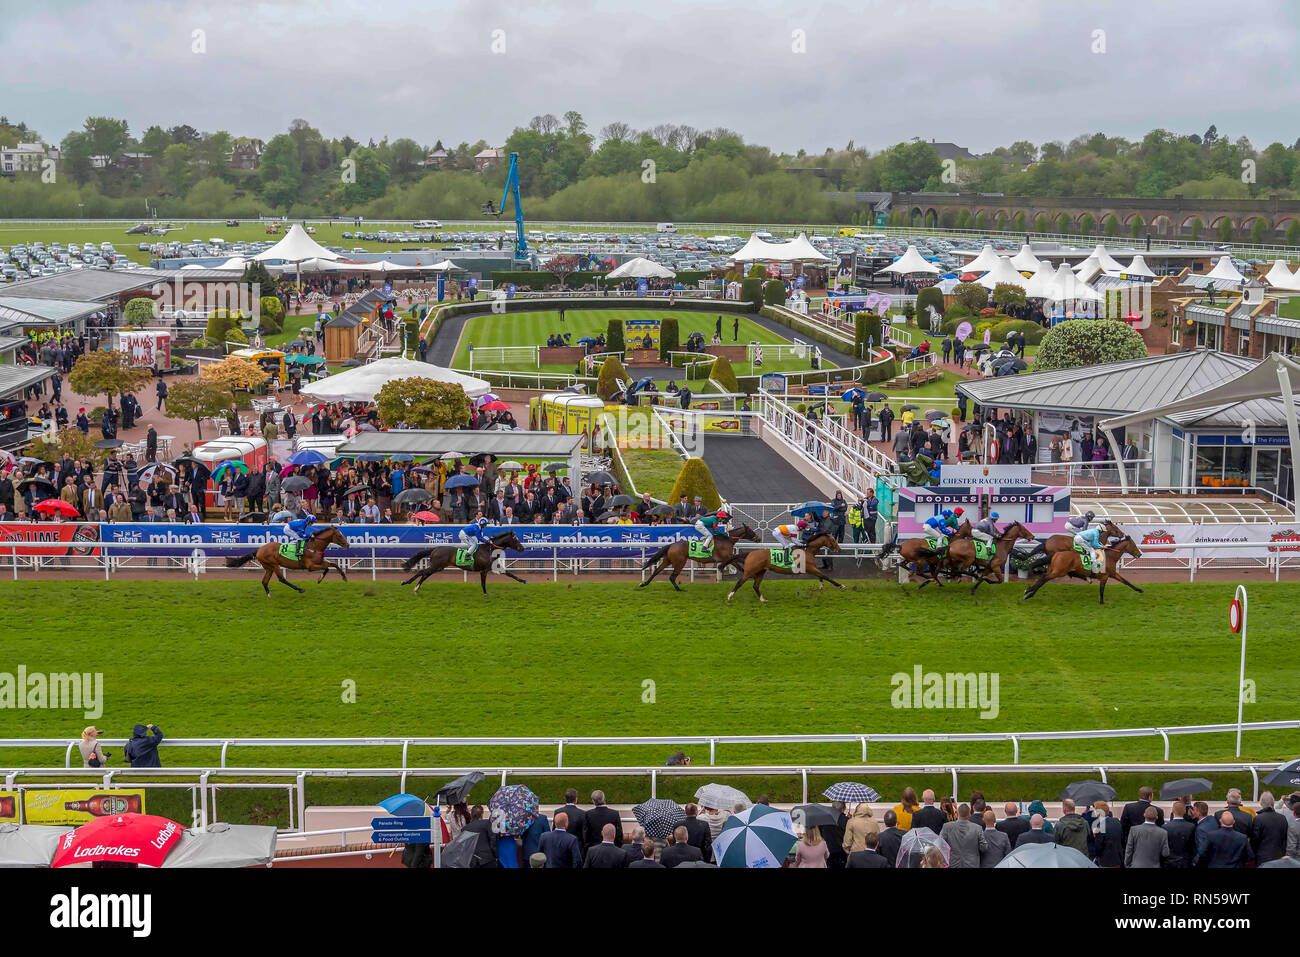 The Chester Vase race meeting at Chester Races. Stock Photo